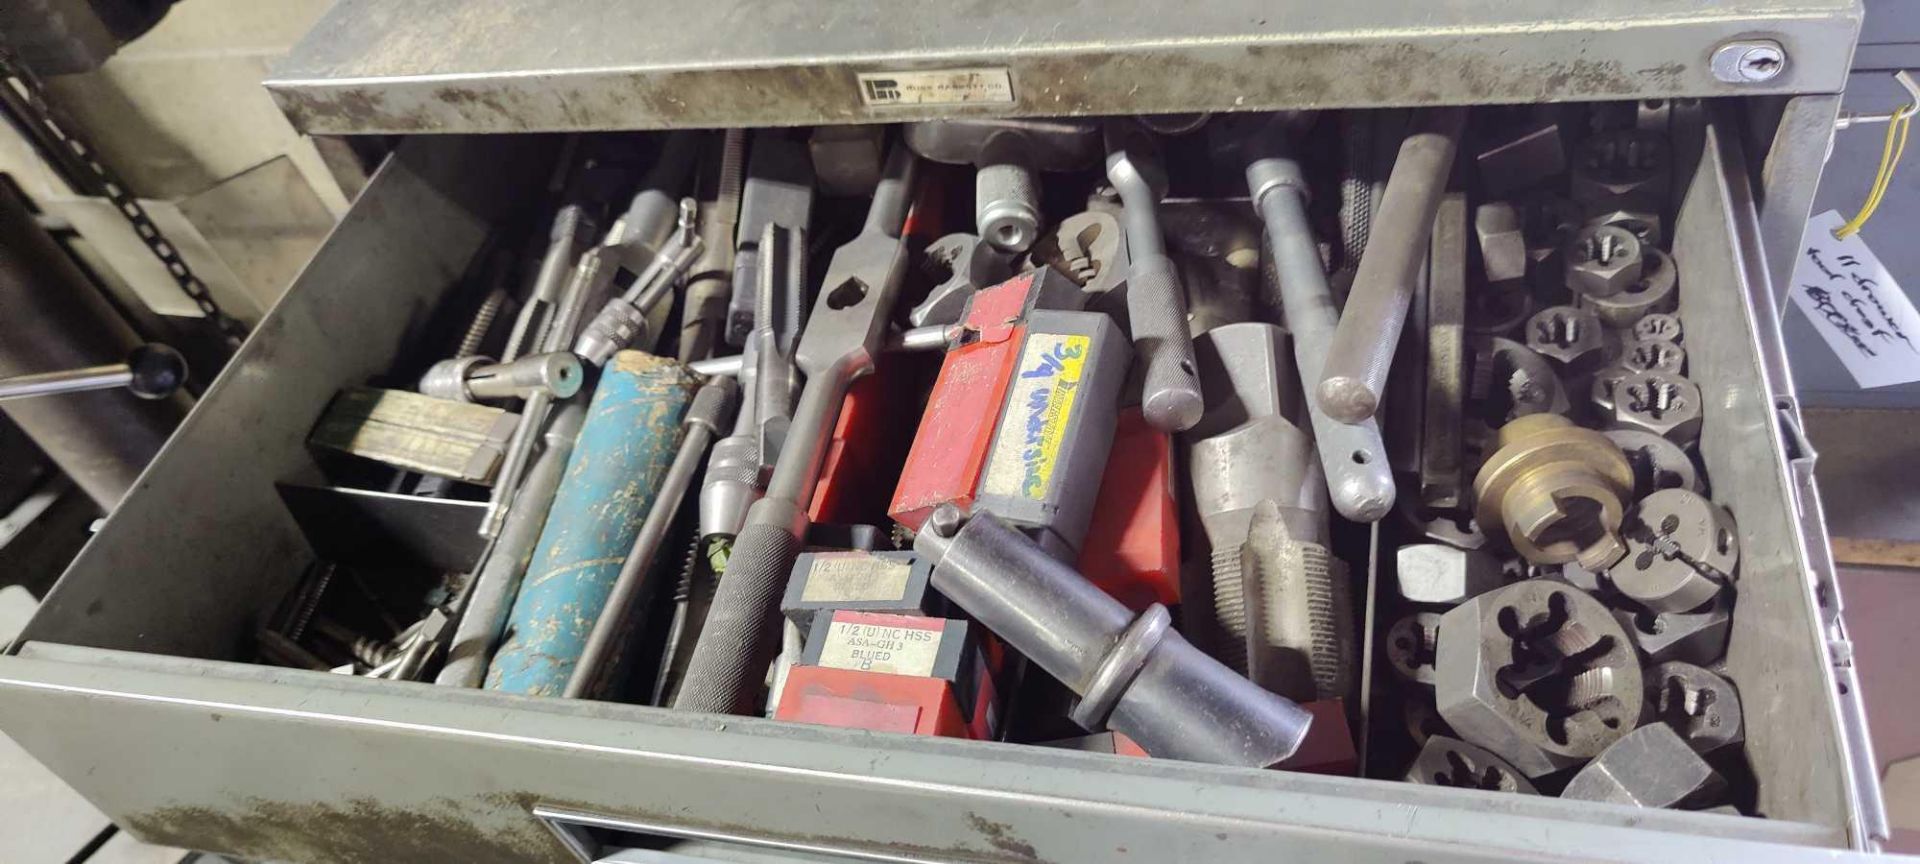 Tool boxes with numerous tooling